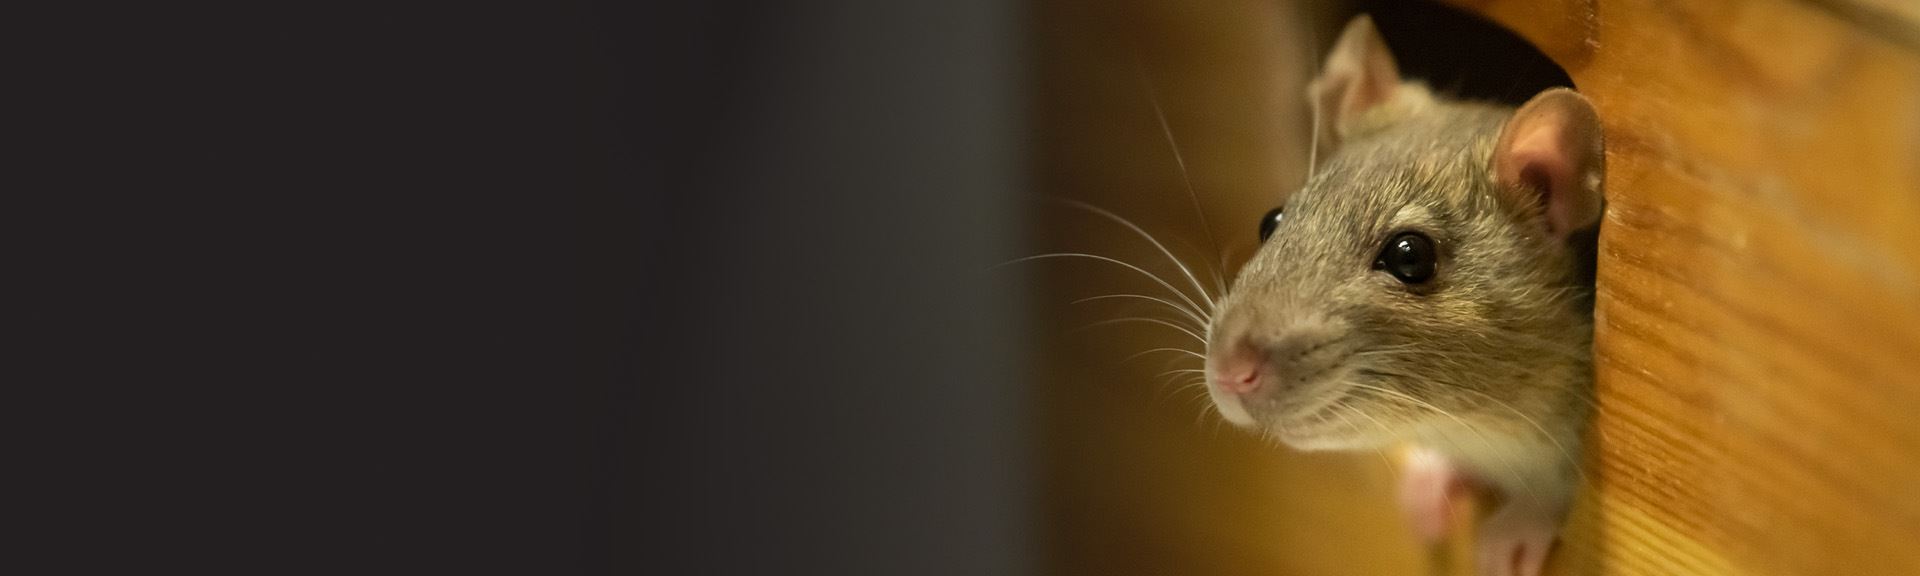 Annual Rodent Control Issue] Why Do Rodents Gnaw? - Pest Control